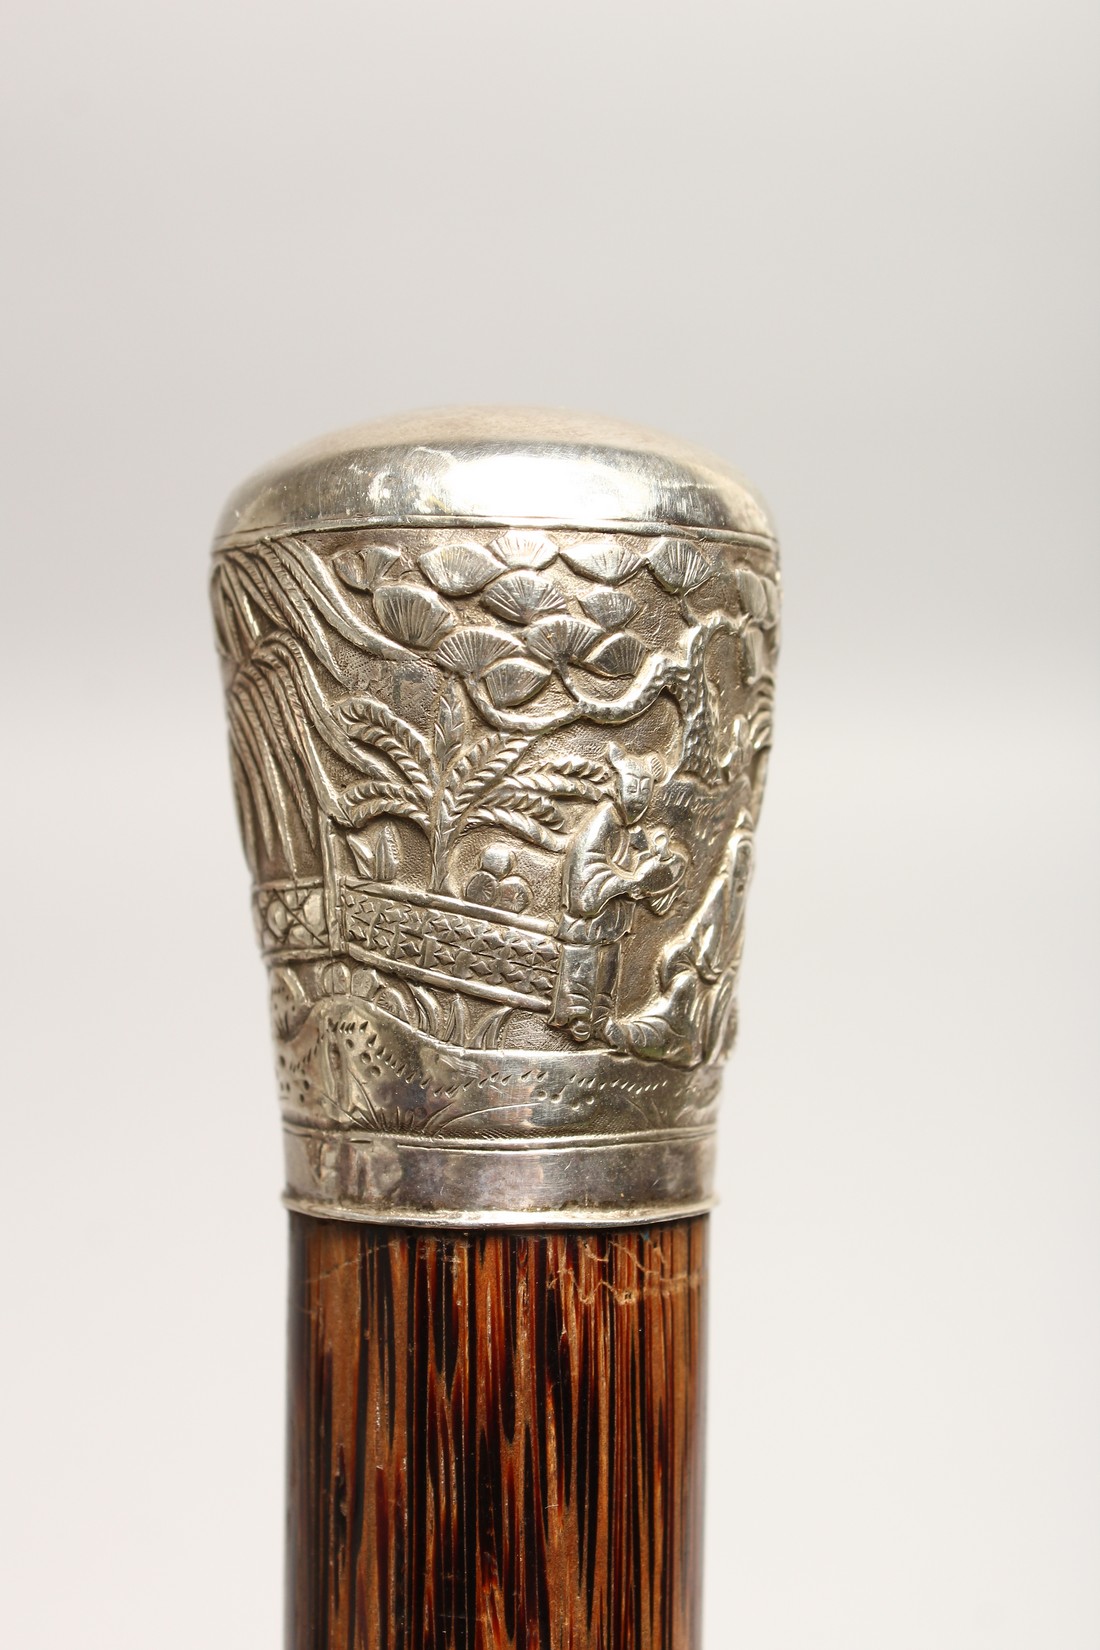 A VERY GOOD 19TH CENTURY CHINESE SILVER TOP WALKING CANE 2ft 11ins long. - Image 5 of 7